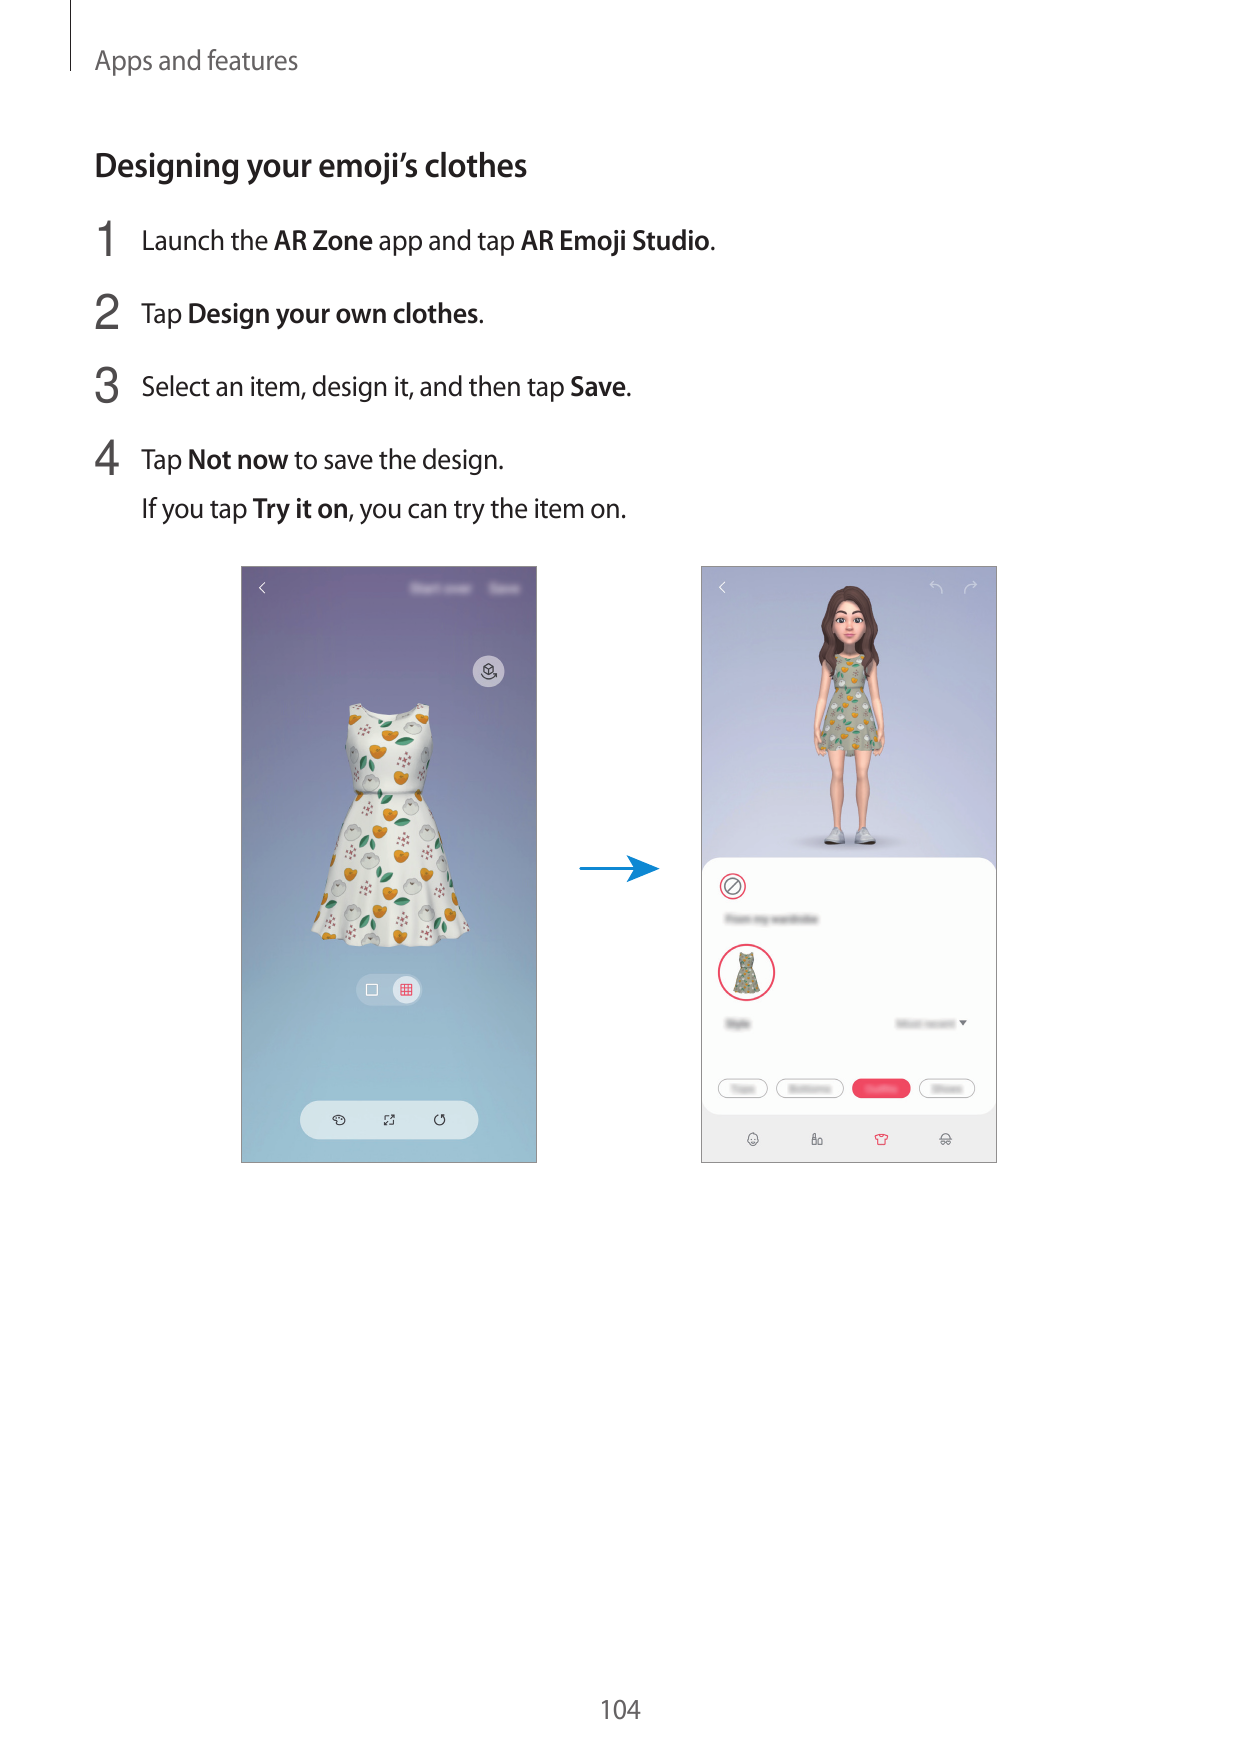 Apps and featuresDesigning your emoji’s clothes1 Launch the AR Zone app and tap AR Emoji Studio.2 Tap Design your own clothes.3 